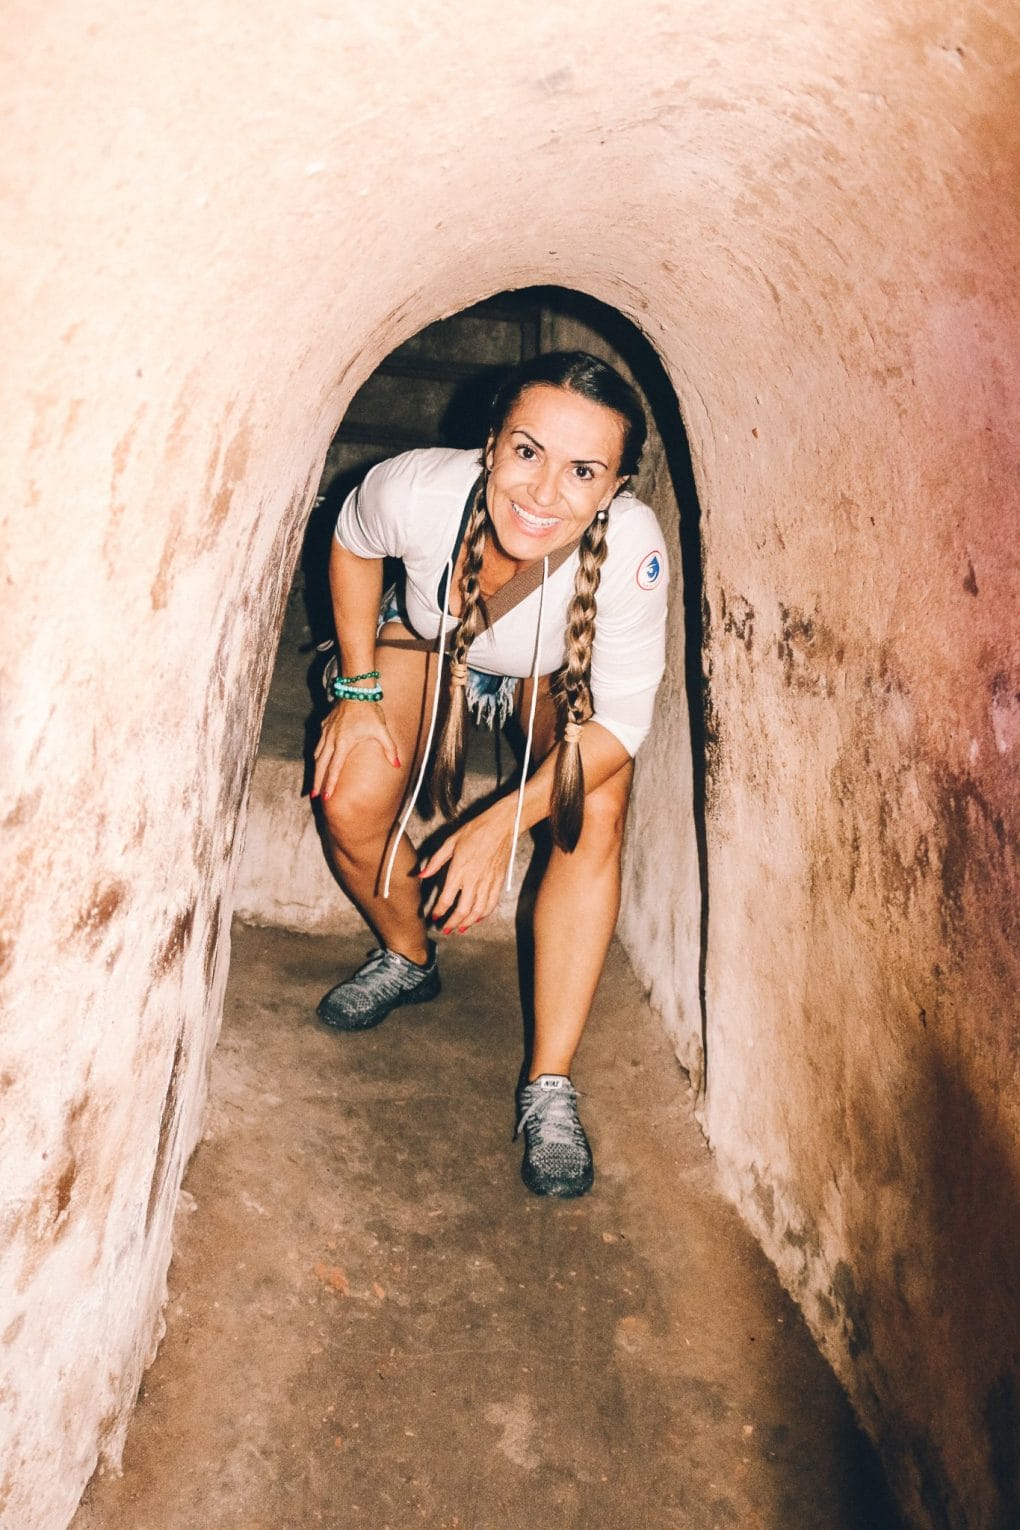 Co Chi Tunnels in Vietnam itinerary